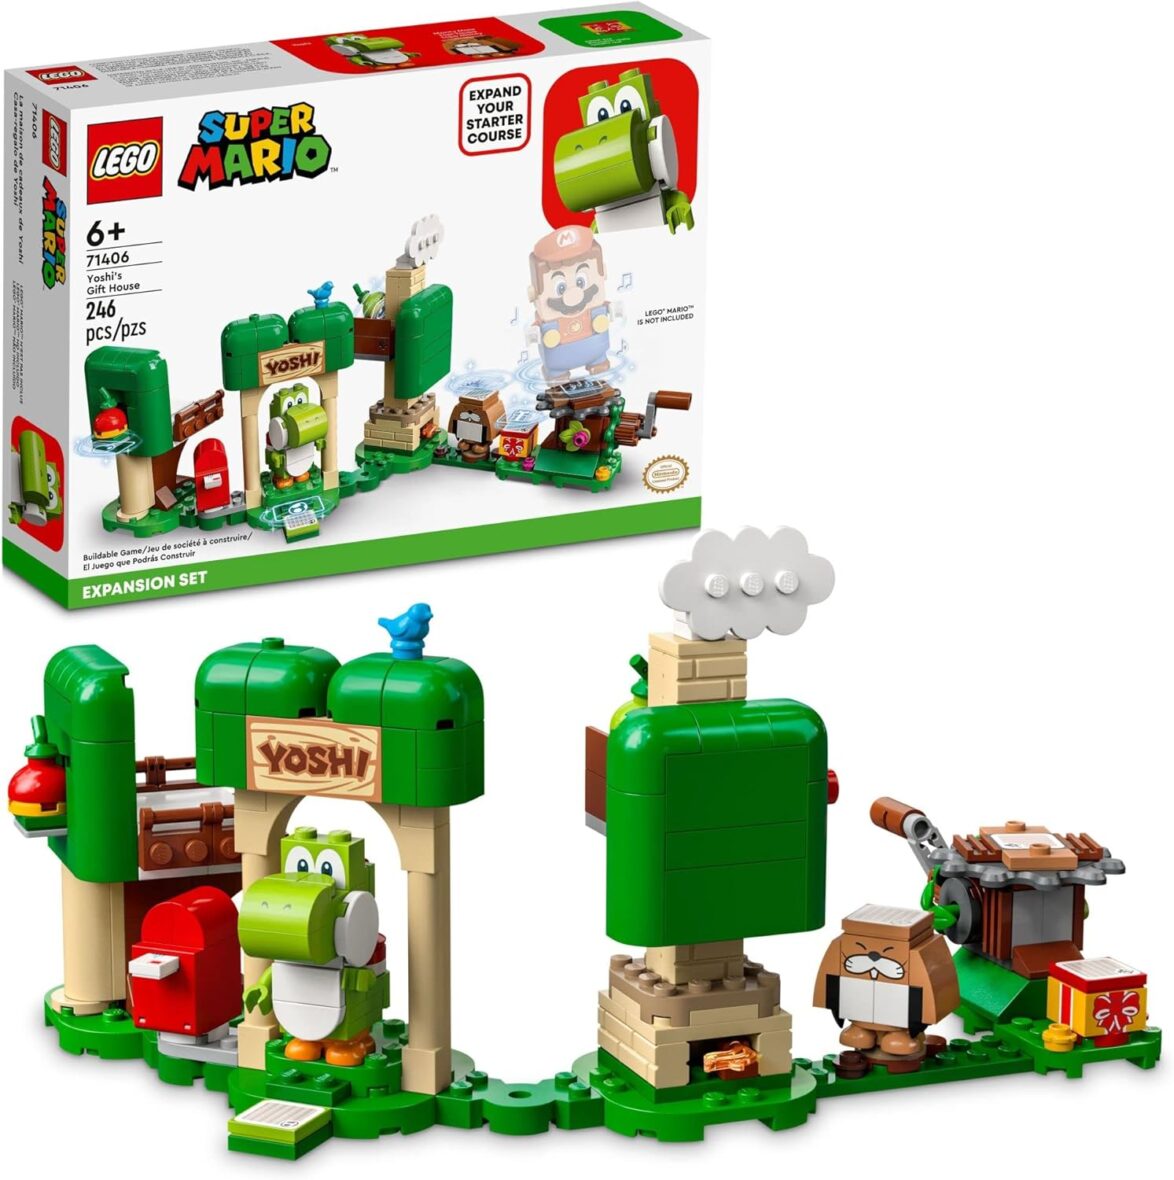 LEGO Super Mario Yoshi’s Gift House Expansion Building Toy Set 71406 – Featuring Iconic Yoshi and Monty Mole Figures, Great Gift for Boys, Girls, Kids, or Fans of the Games and Movie Ages 6+